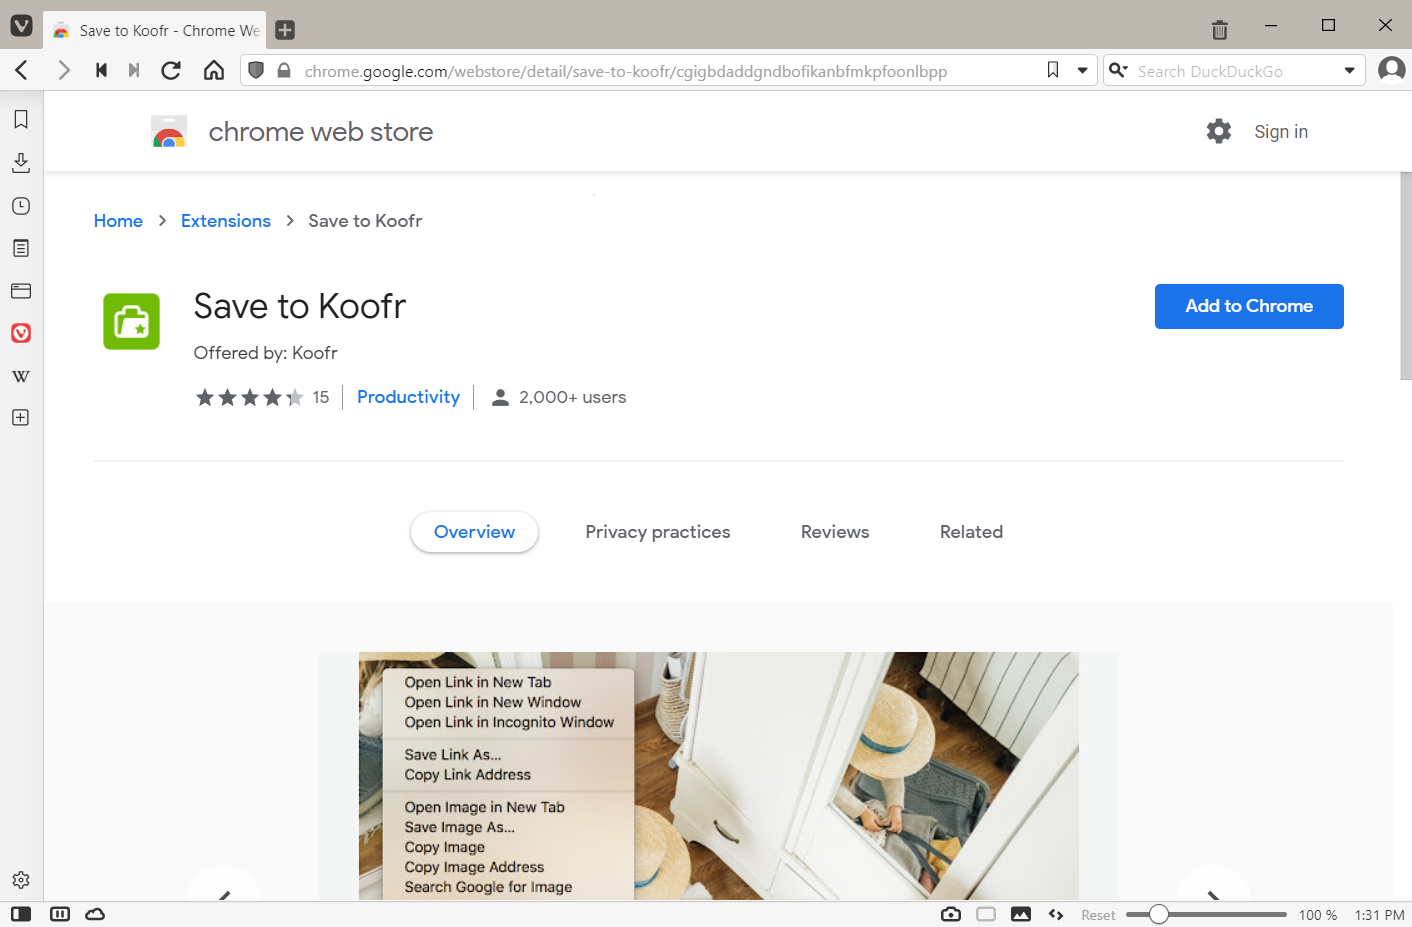 Find the Save to Koofr extension in the Chrome web store.